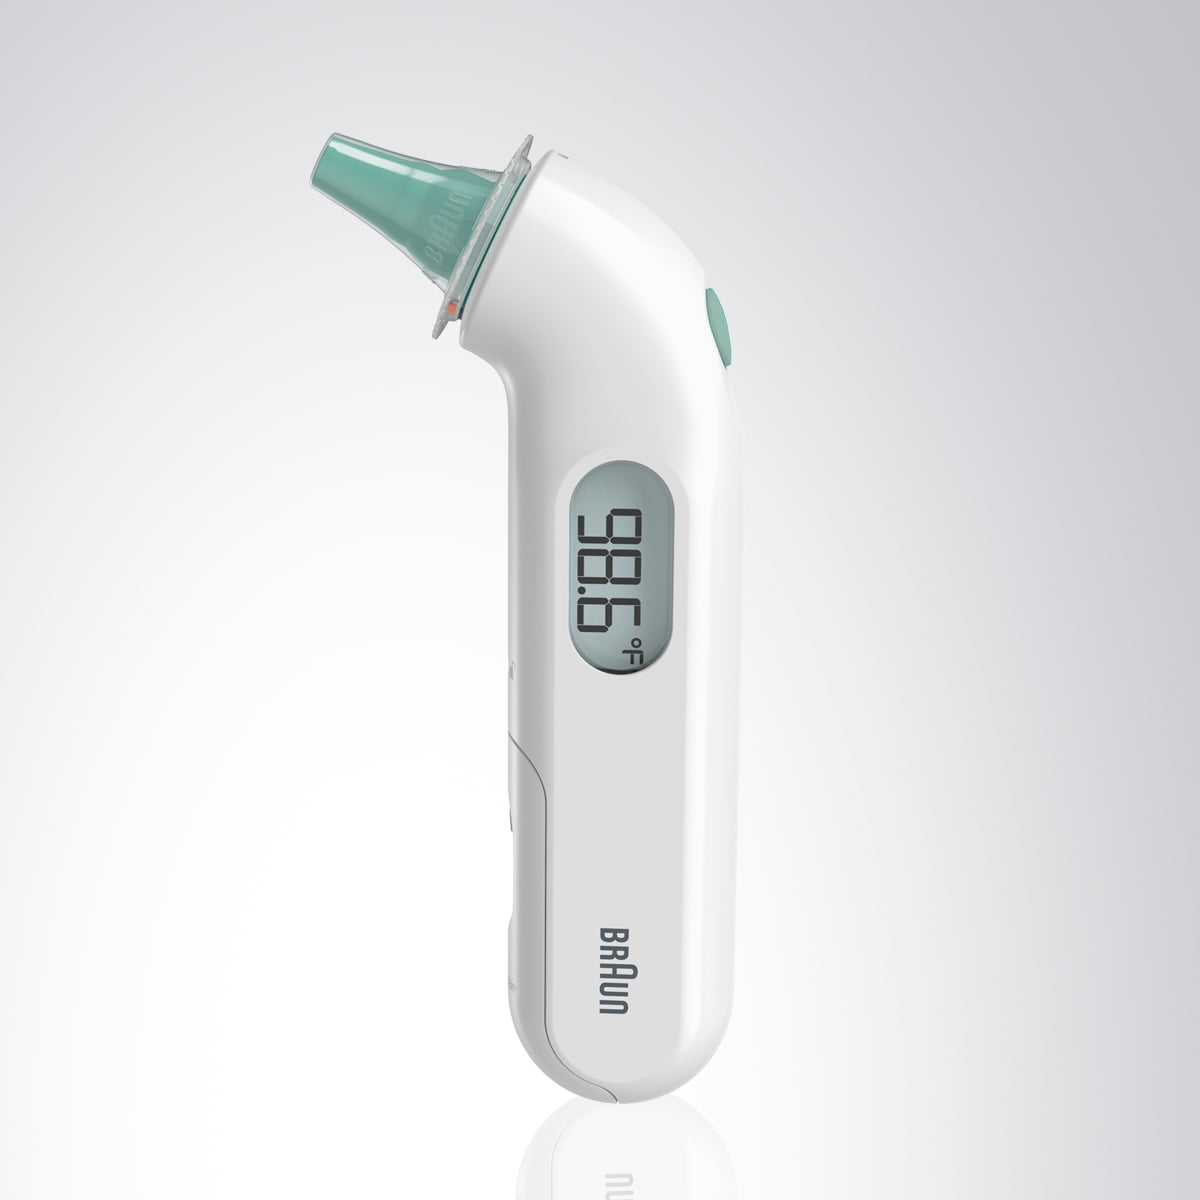 Braun ThermoScan 3 Ear Thermometer, IRT3030US, White -